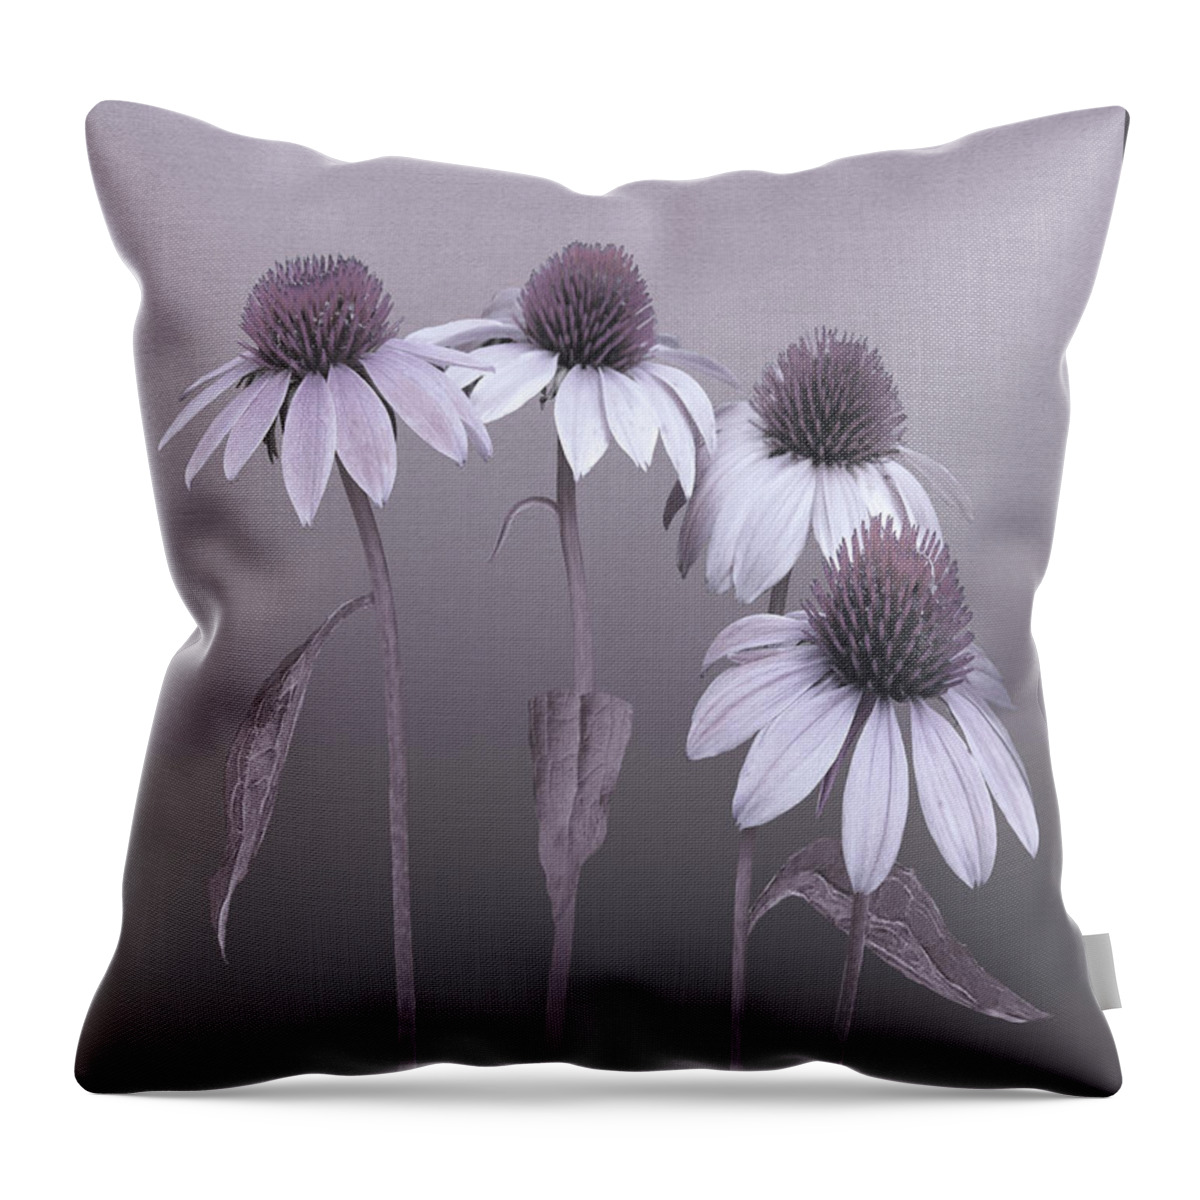 Echinacea Throw Pillow featuring the digital art Purple Coneflowers and Dragonfly by M Spadecaller